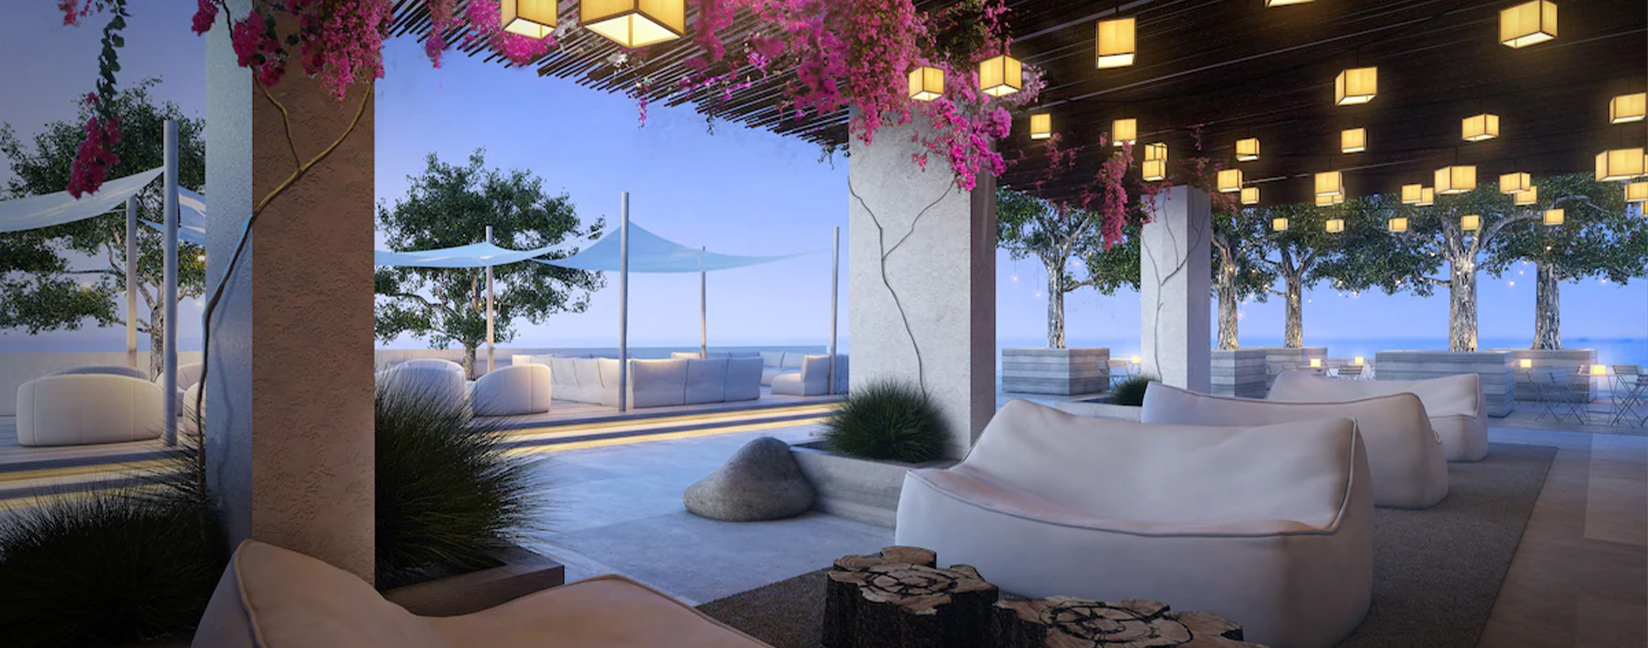 Luxury hotels in Miami